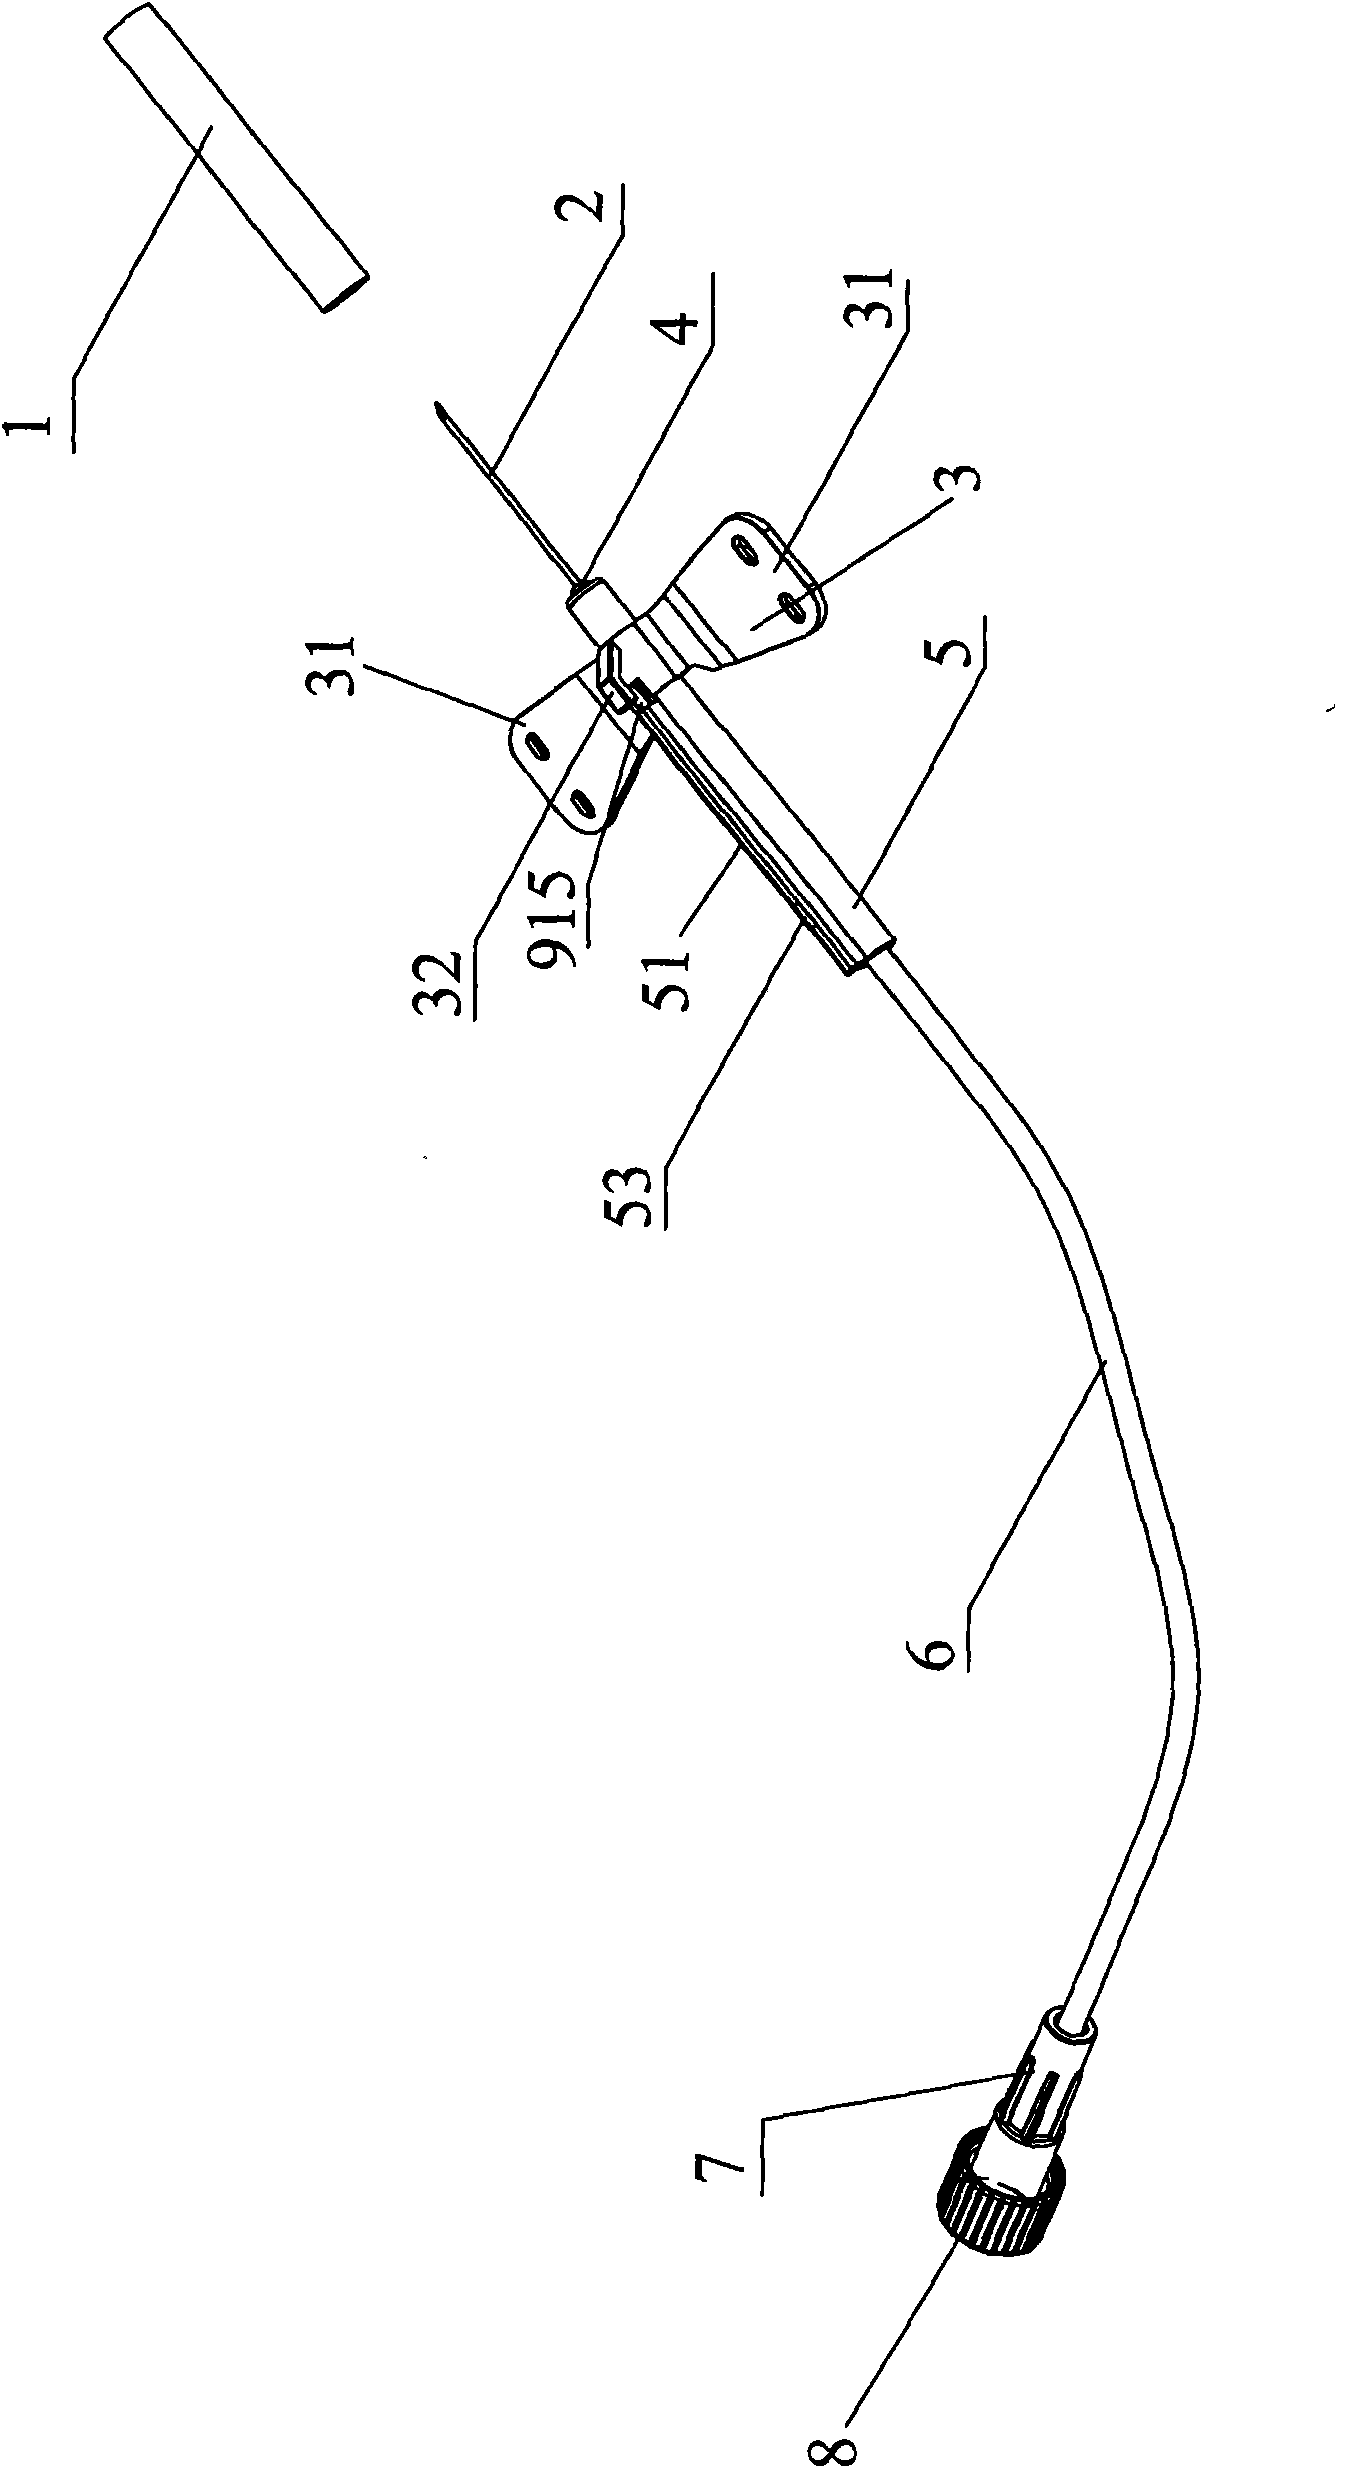 Safe intravenous infusion needle